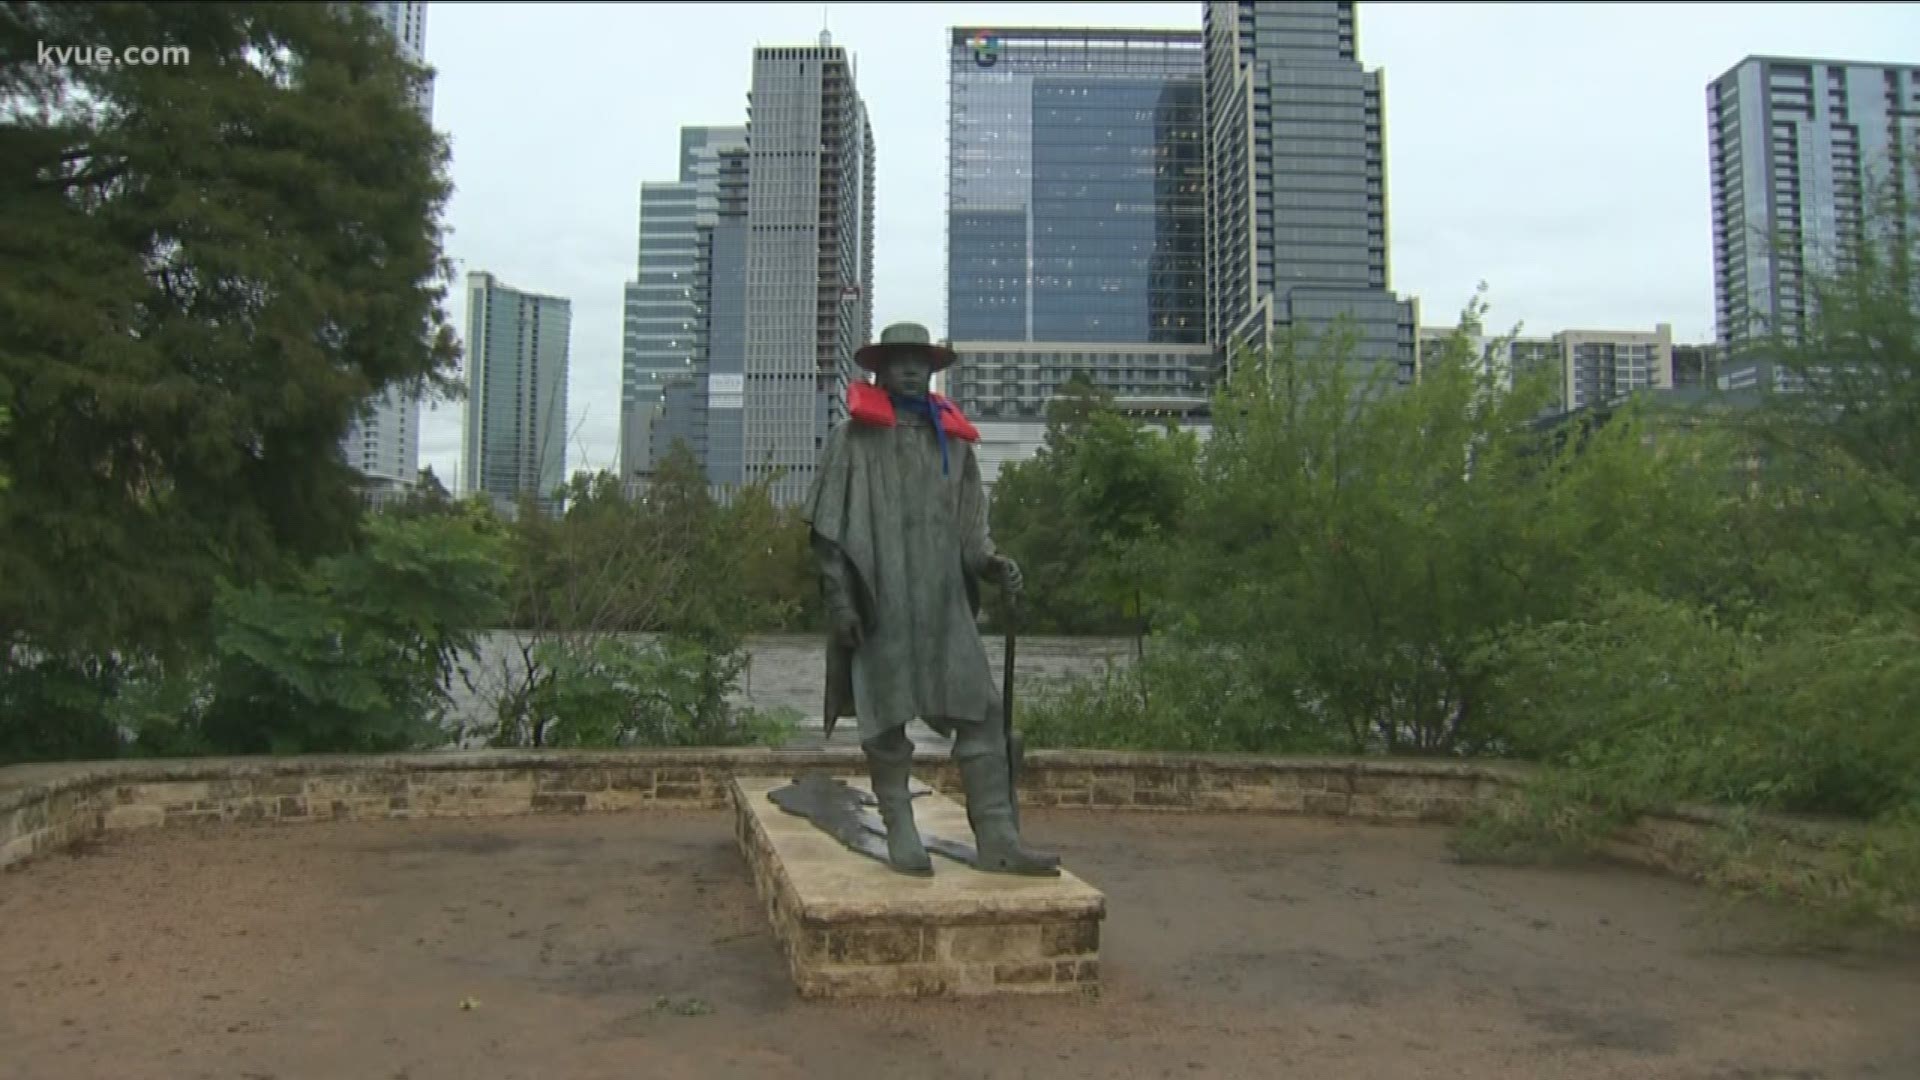 Austin police telling people to stay off trail near Lady Bird Lake. Someone put a life jacket on the Stevie Ray Vaughan statue as the area prepares for flooding.